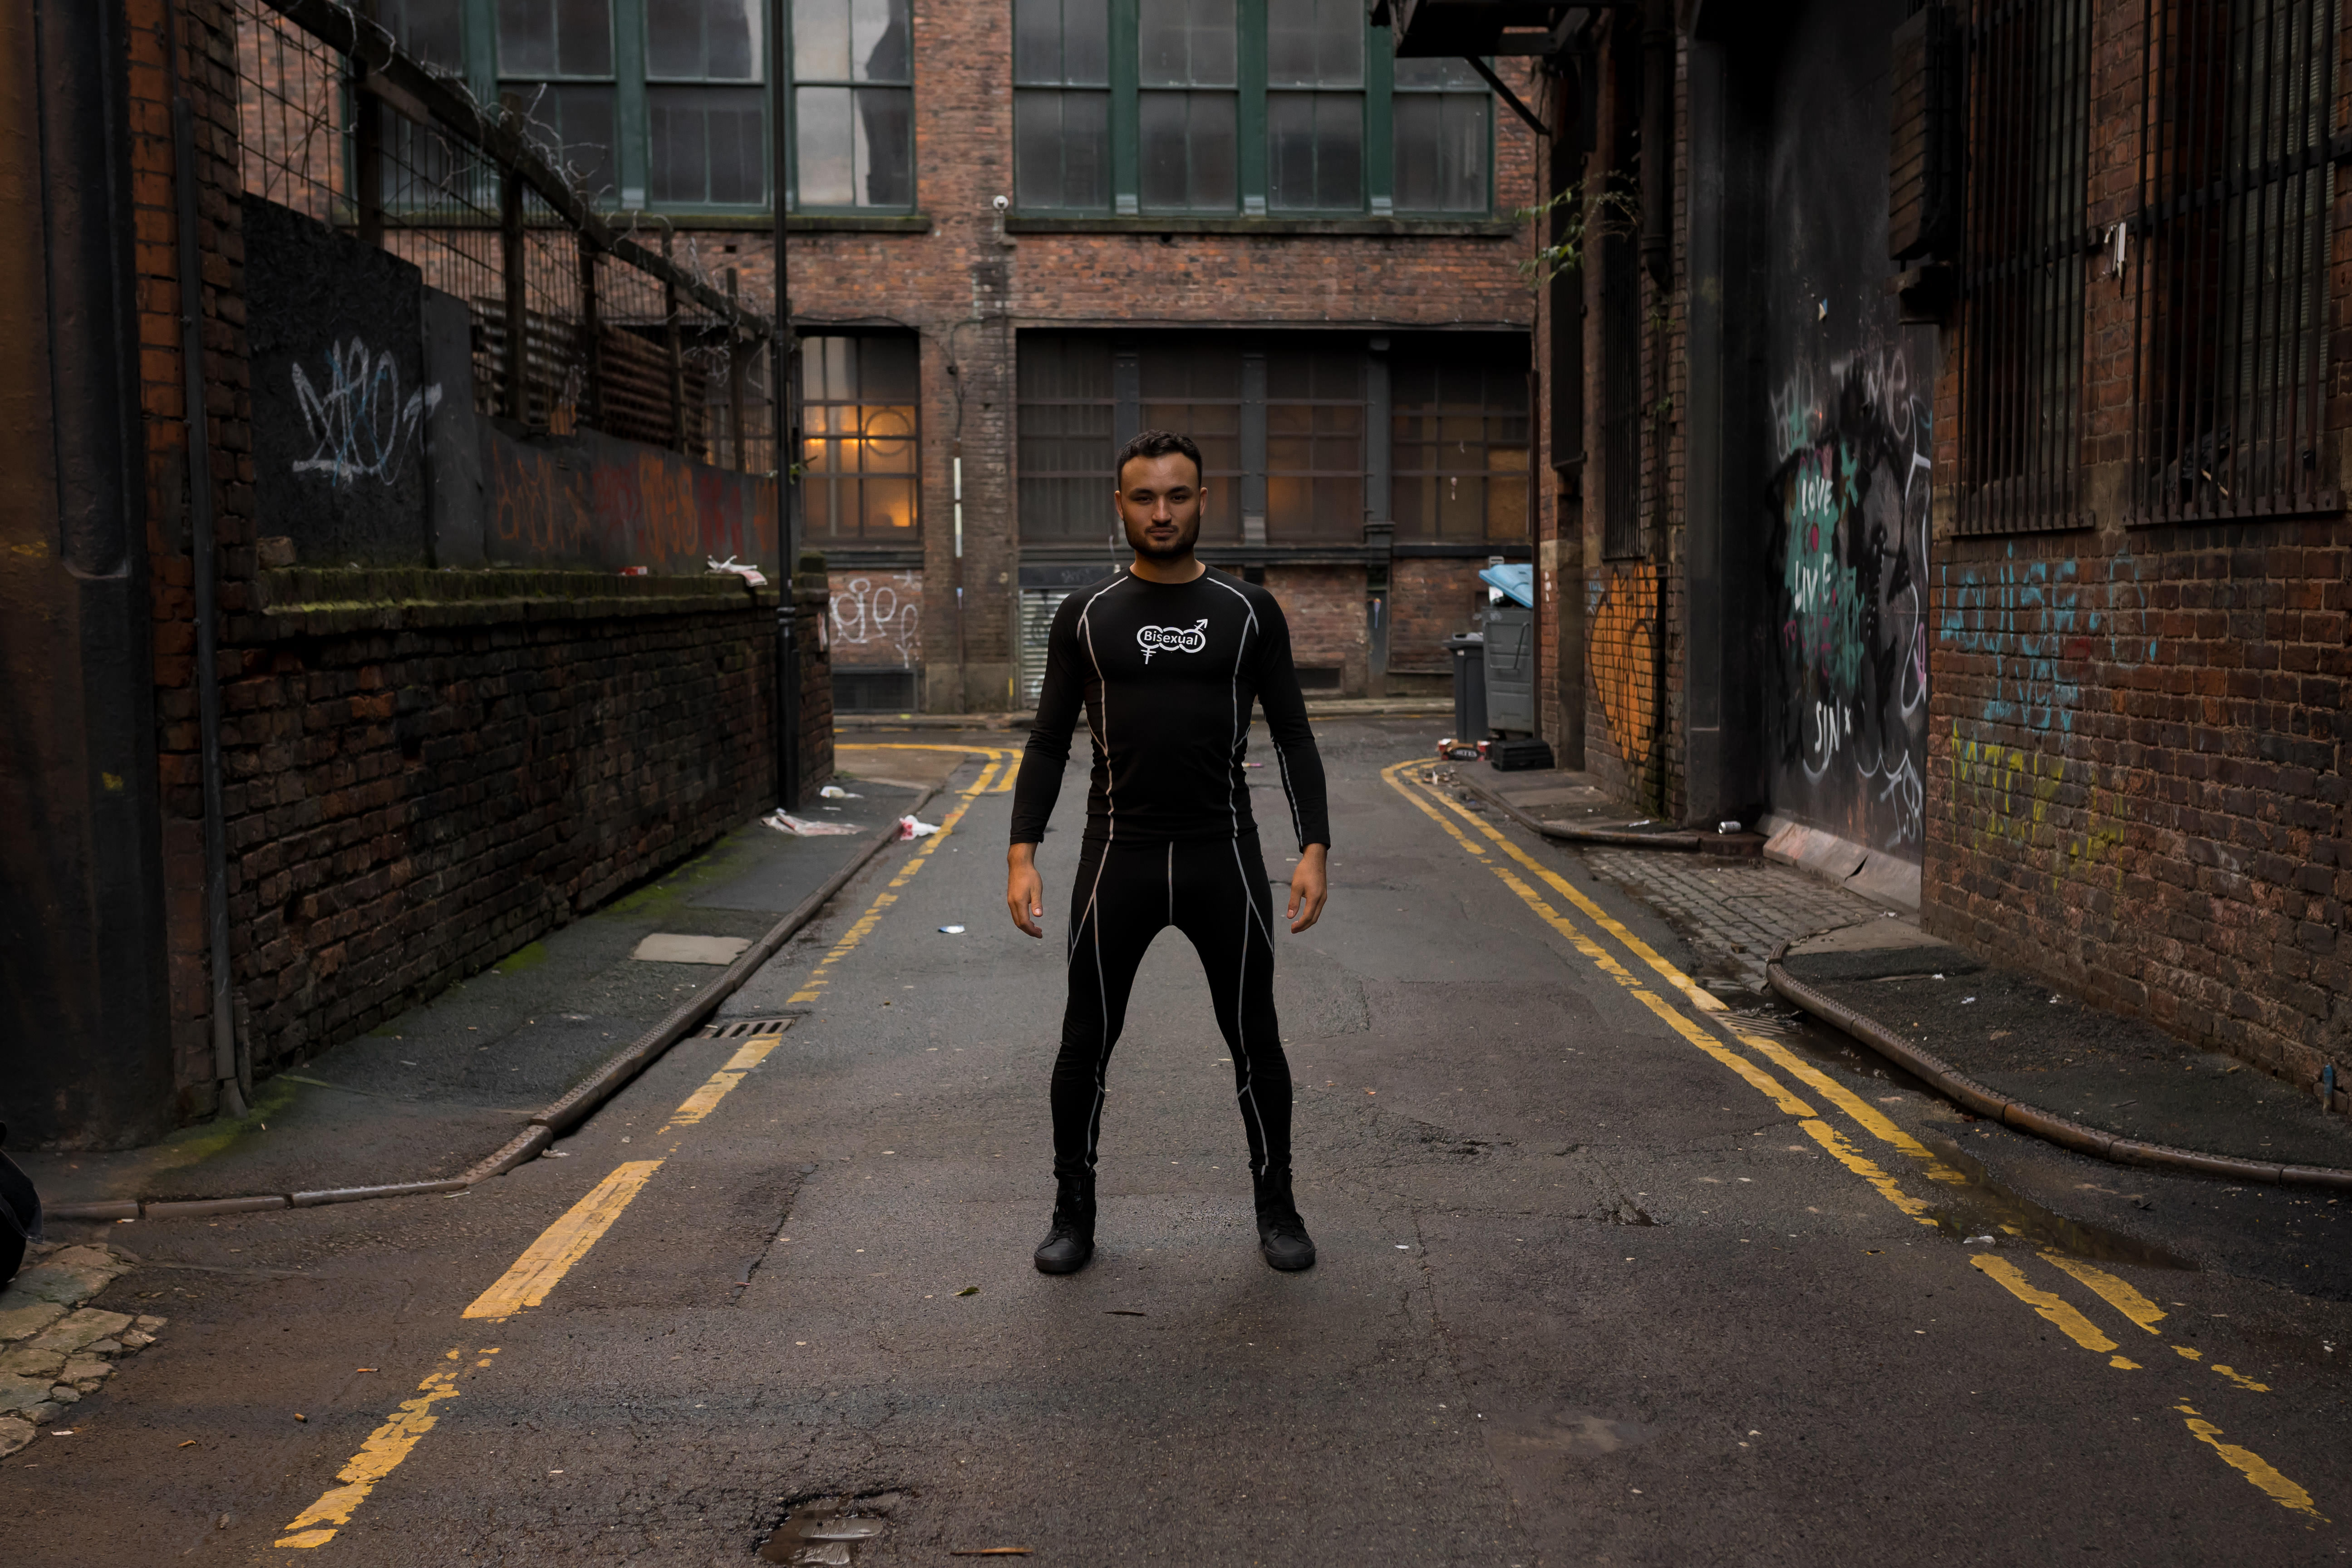 A model photograph of Lewis Oakley standing confidently in the middle of a street wearing dark clothing.